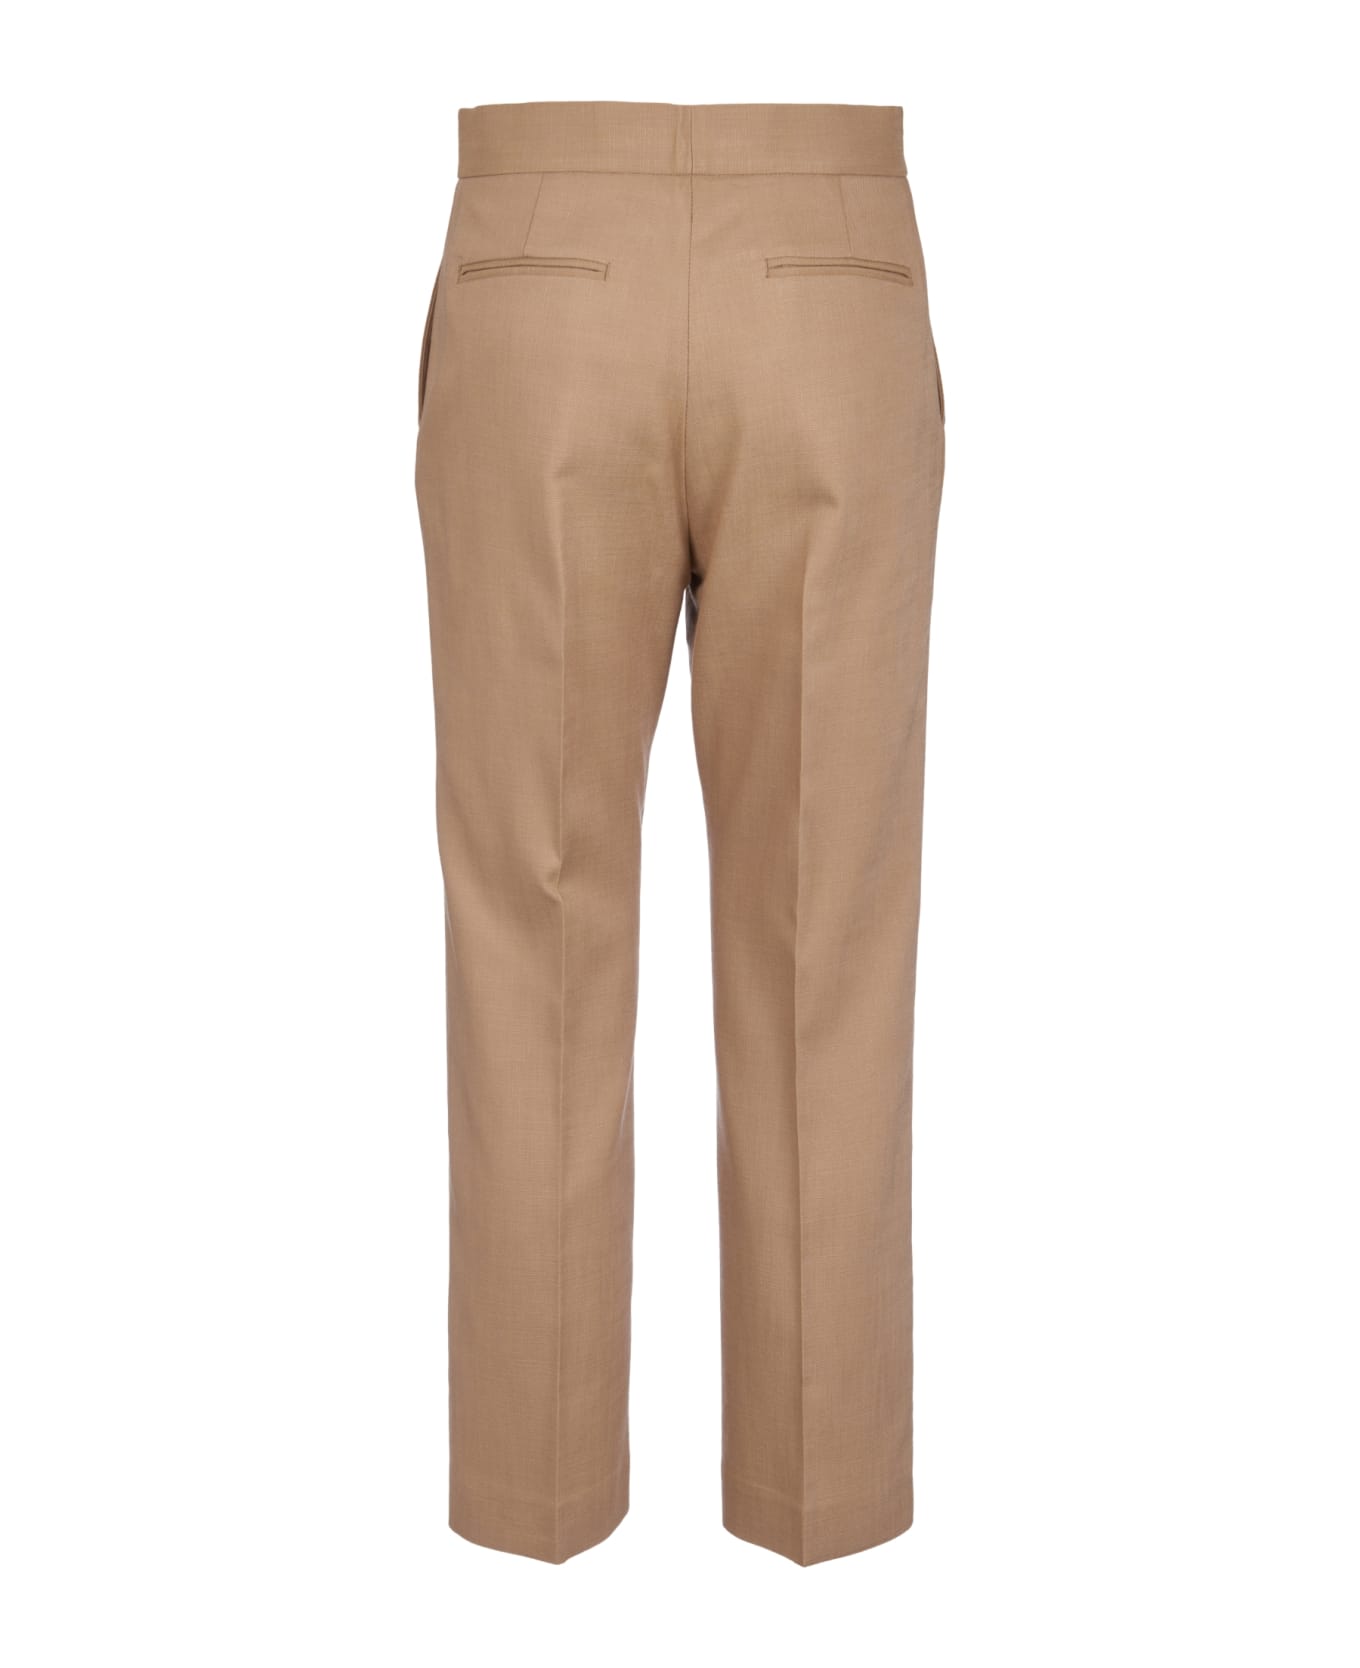 MSGM Concealed Trousers - Beige